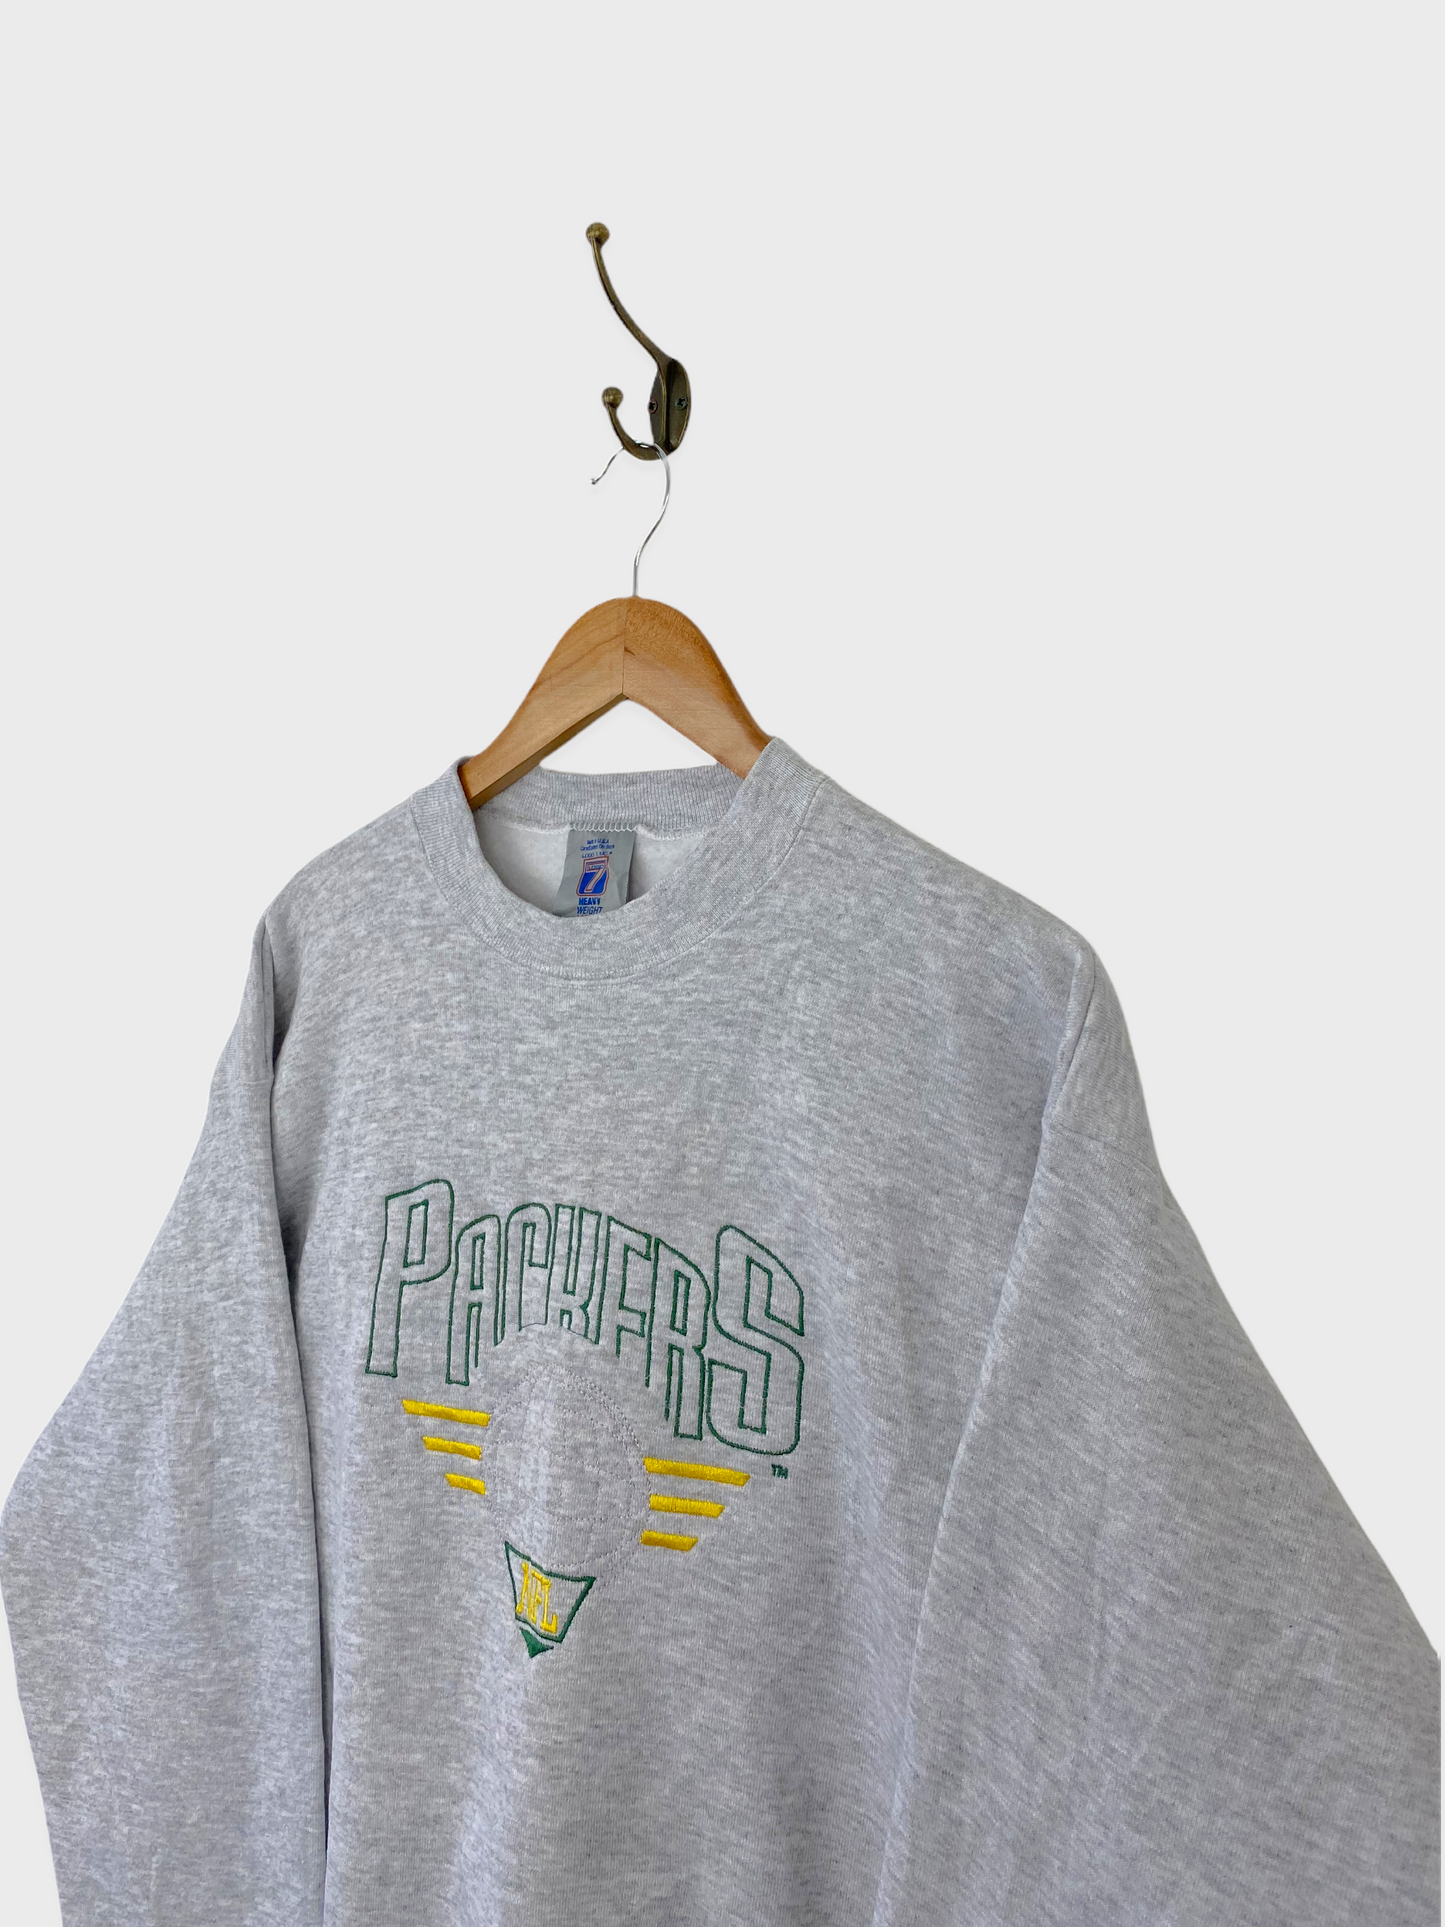 90's Green Bay Packers NFL USA Made Embroidered Vintage Sweatshirt Size 12